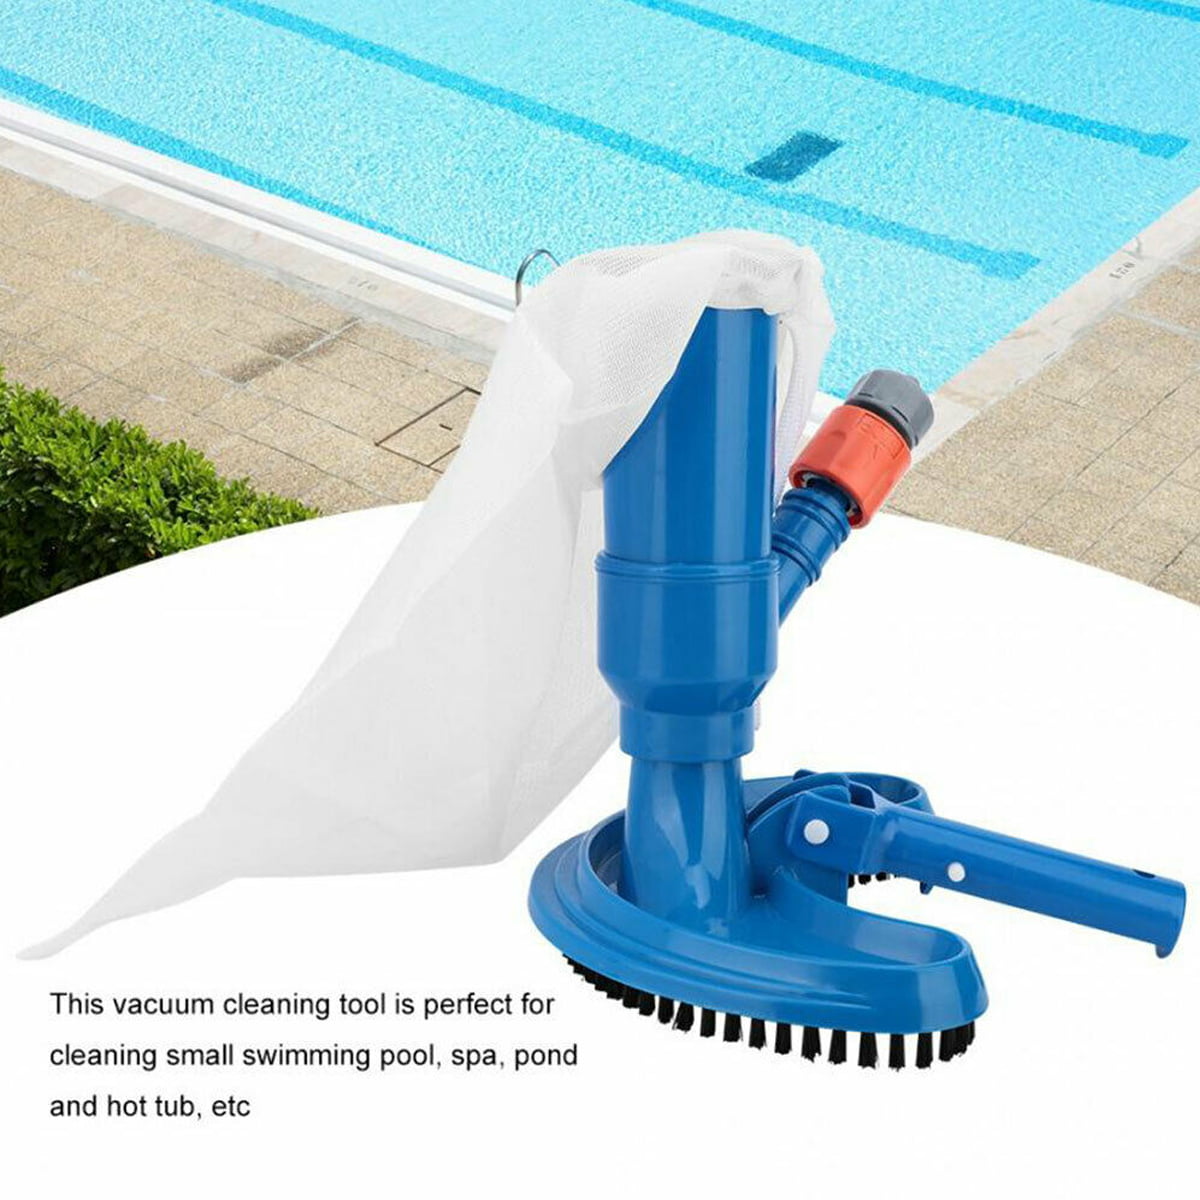 Red-eye Portable Pool Vacuum Jet Underwater Cleaner Spa Pond Mini Jet Vac Vacuum Cleaner Pool Cleaning Accessories for Above Ground Pool Spas Ponds & Fountains 